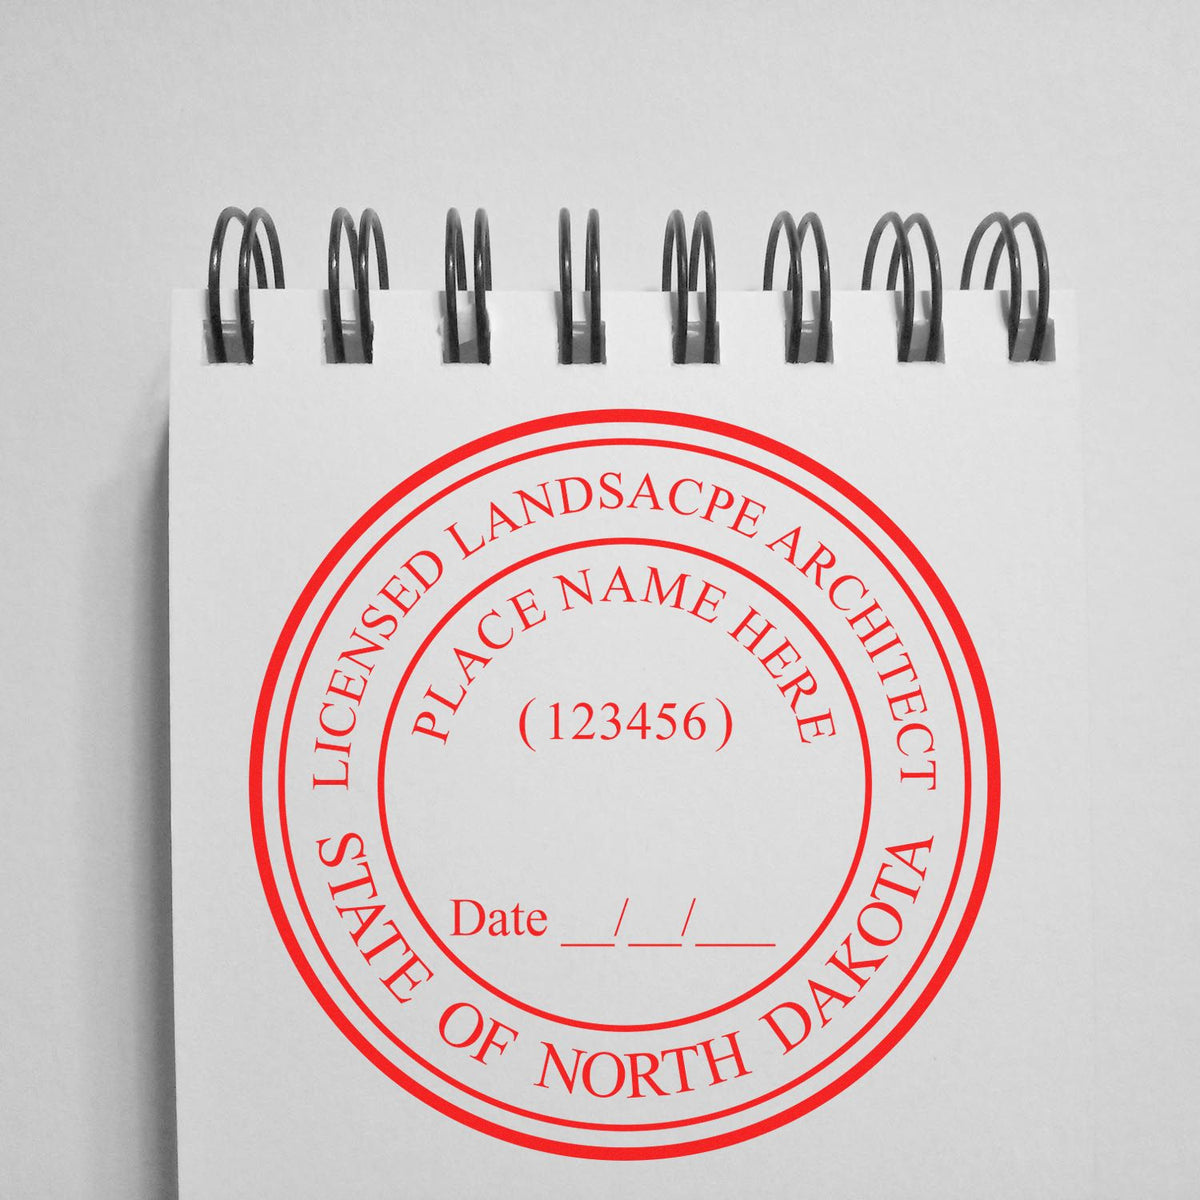 The North Dakota Landscape Architectural Seal Stamp stamp impression comes to life with a crisp, detailed photo on paper - showcasing true professional quality.